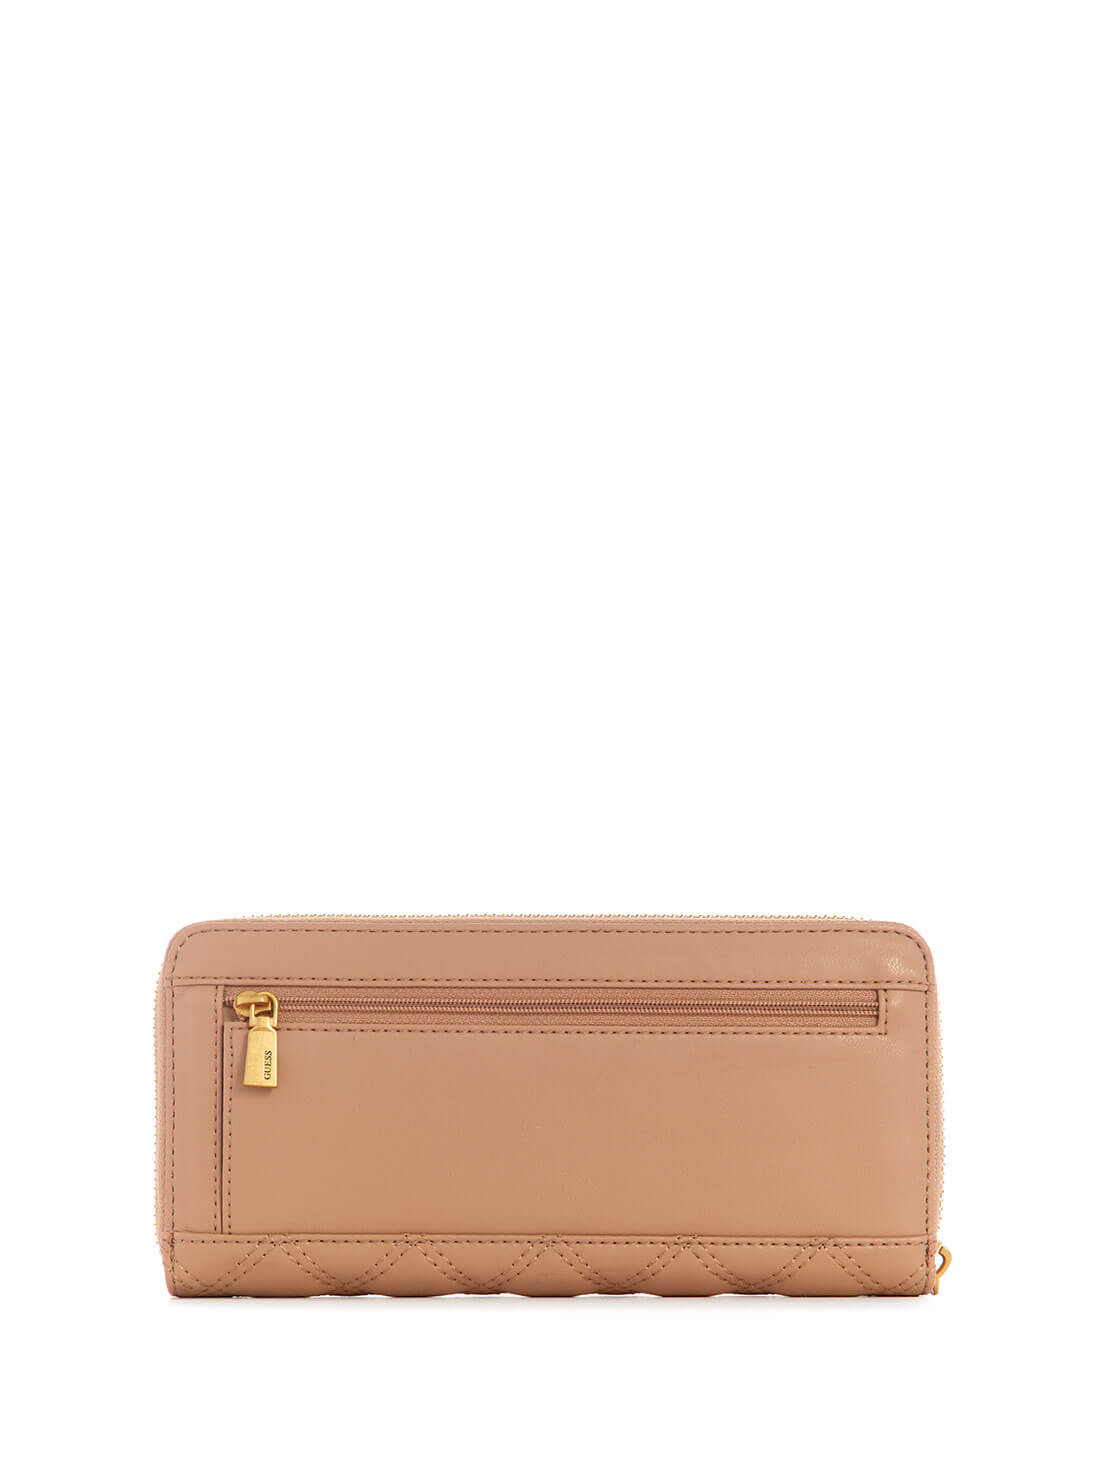 Women's Beige Giully Large Wallet back view